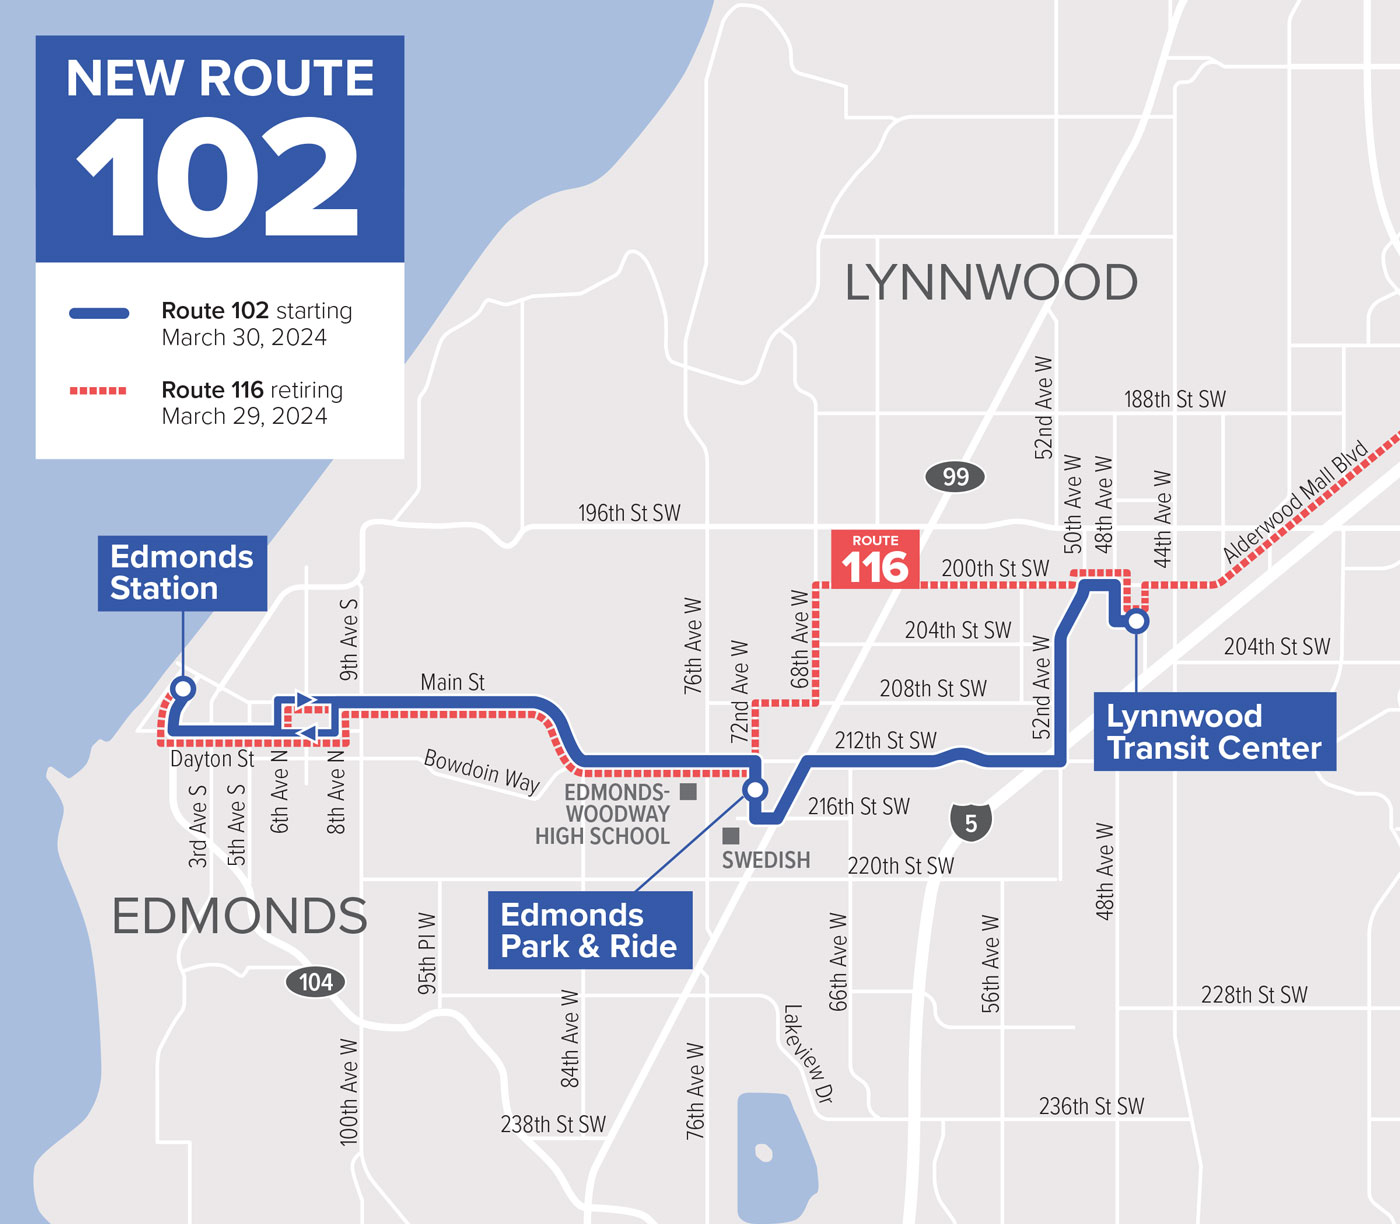 Map of Route 102 linking downtown Edmonds, Edmonds-Woodway High School, Swedish Hospital, and Lynnwood Transit Center, illustrating new travel options in South Lynnwood. Shows connections to Swift Blue and Orange lines, with an initial service frequency of every 30 minutes during peak weekday times, starting March 2024. Notes a future increase in service frequency from the initial 30-minute intervals.